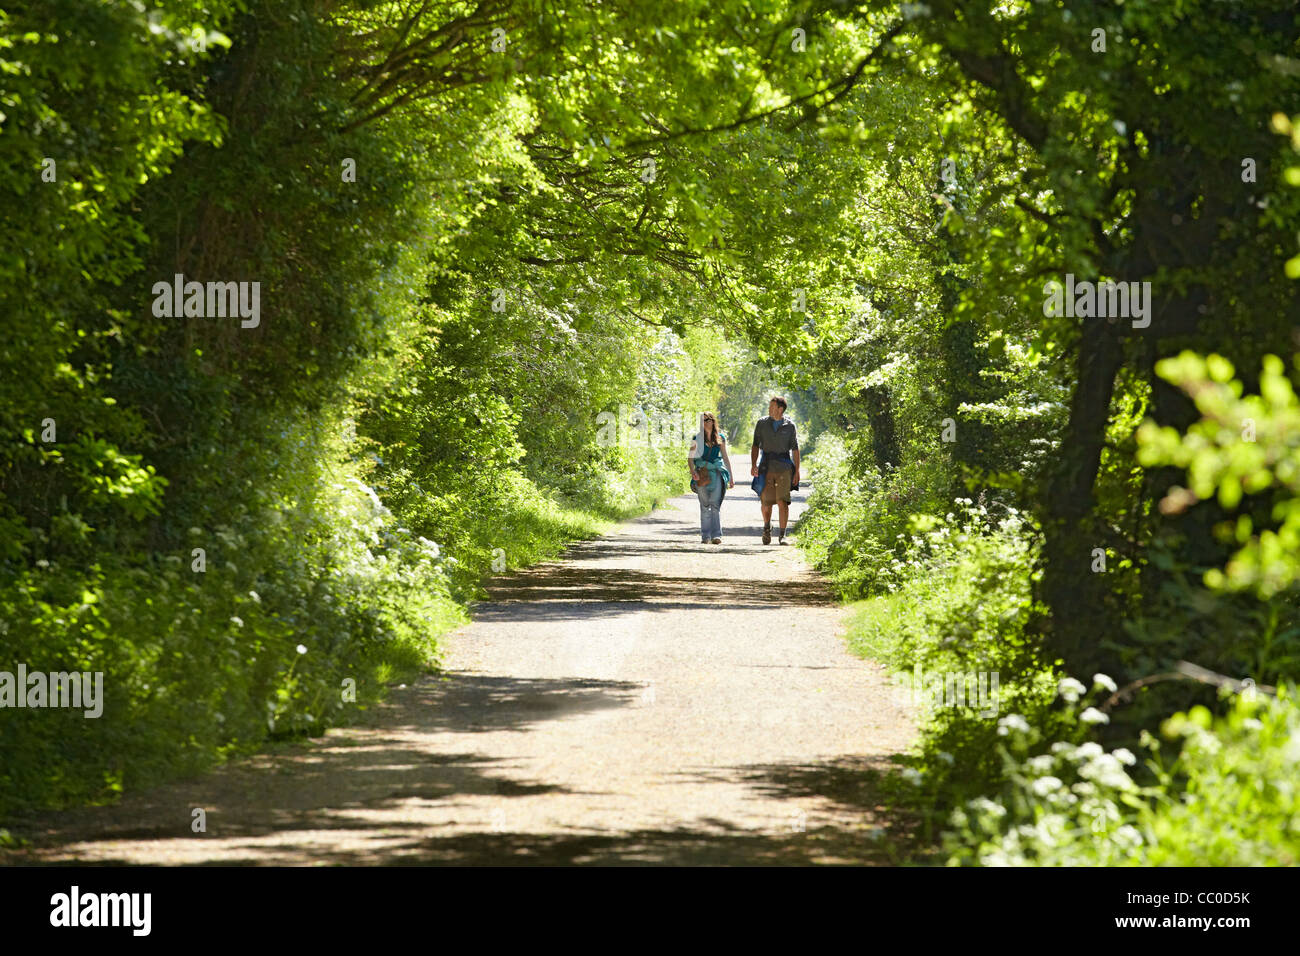 A couple walking along the Wirral Way footpath, Wirral, UK on a warm late spring afternoon Stock Photo